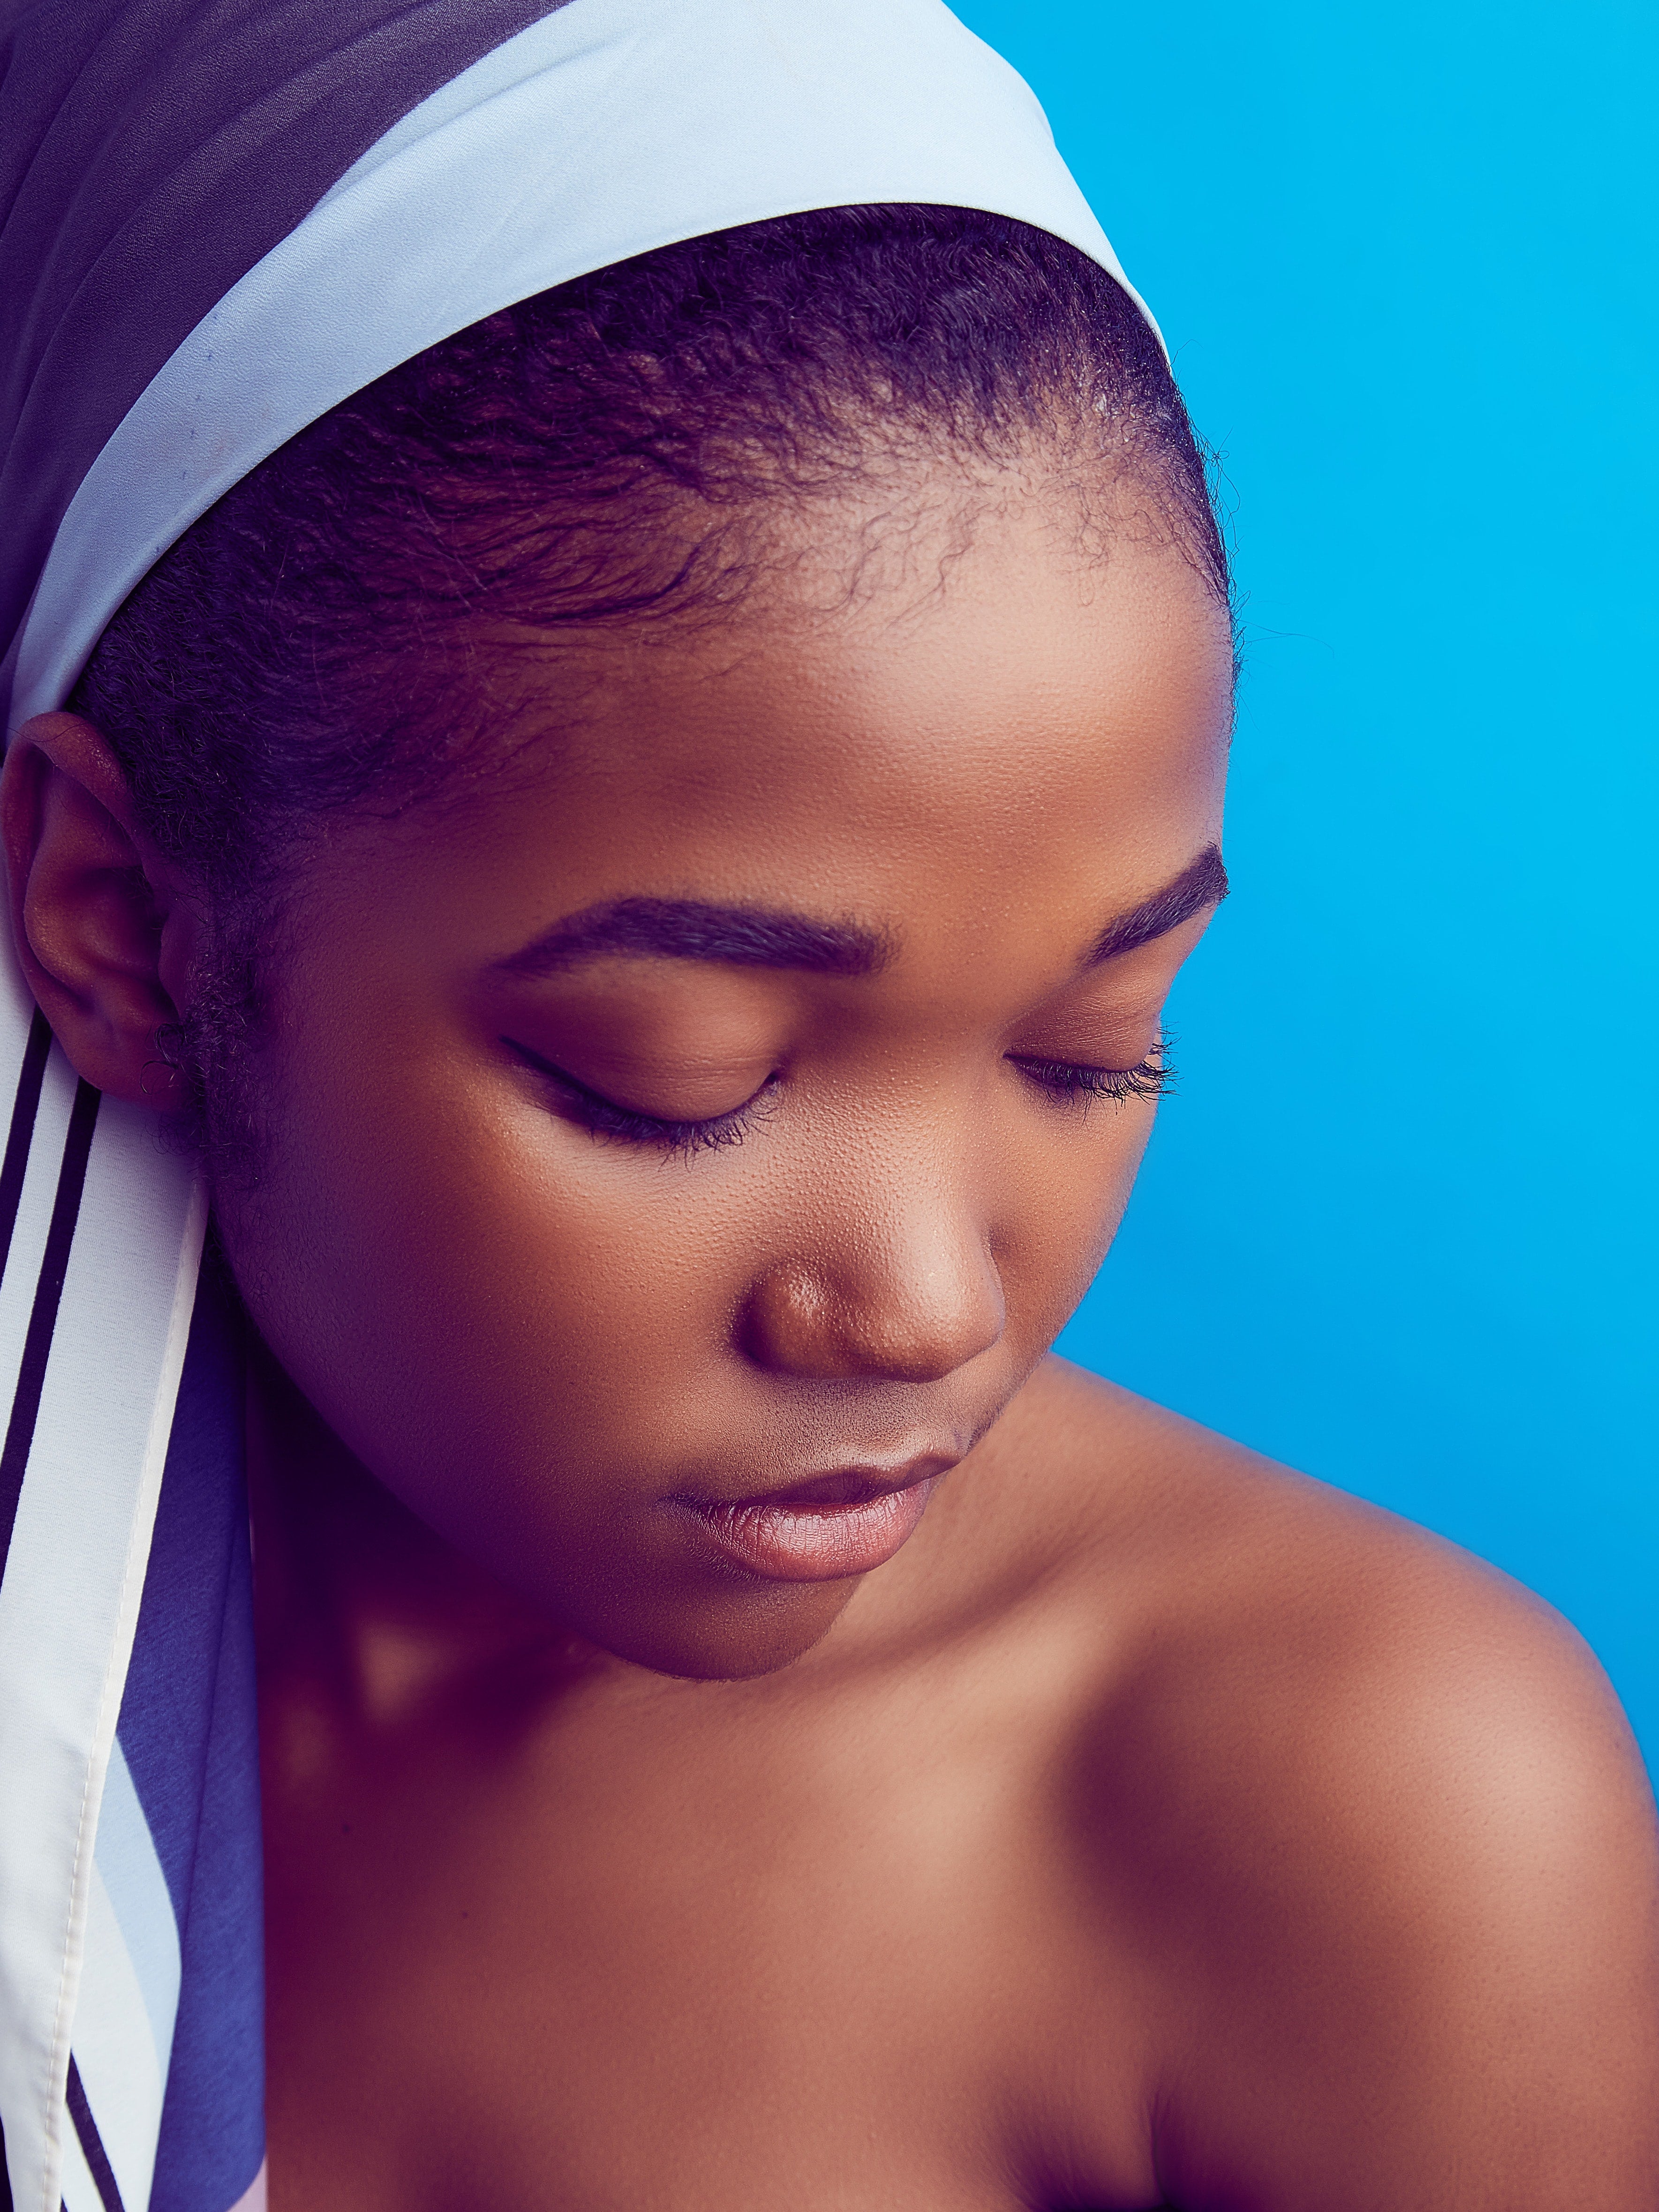 Gen-Z skin-care brand Bubble introduces first OTC product